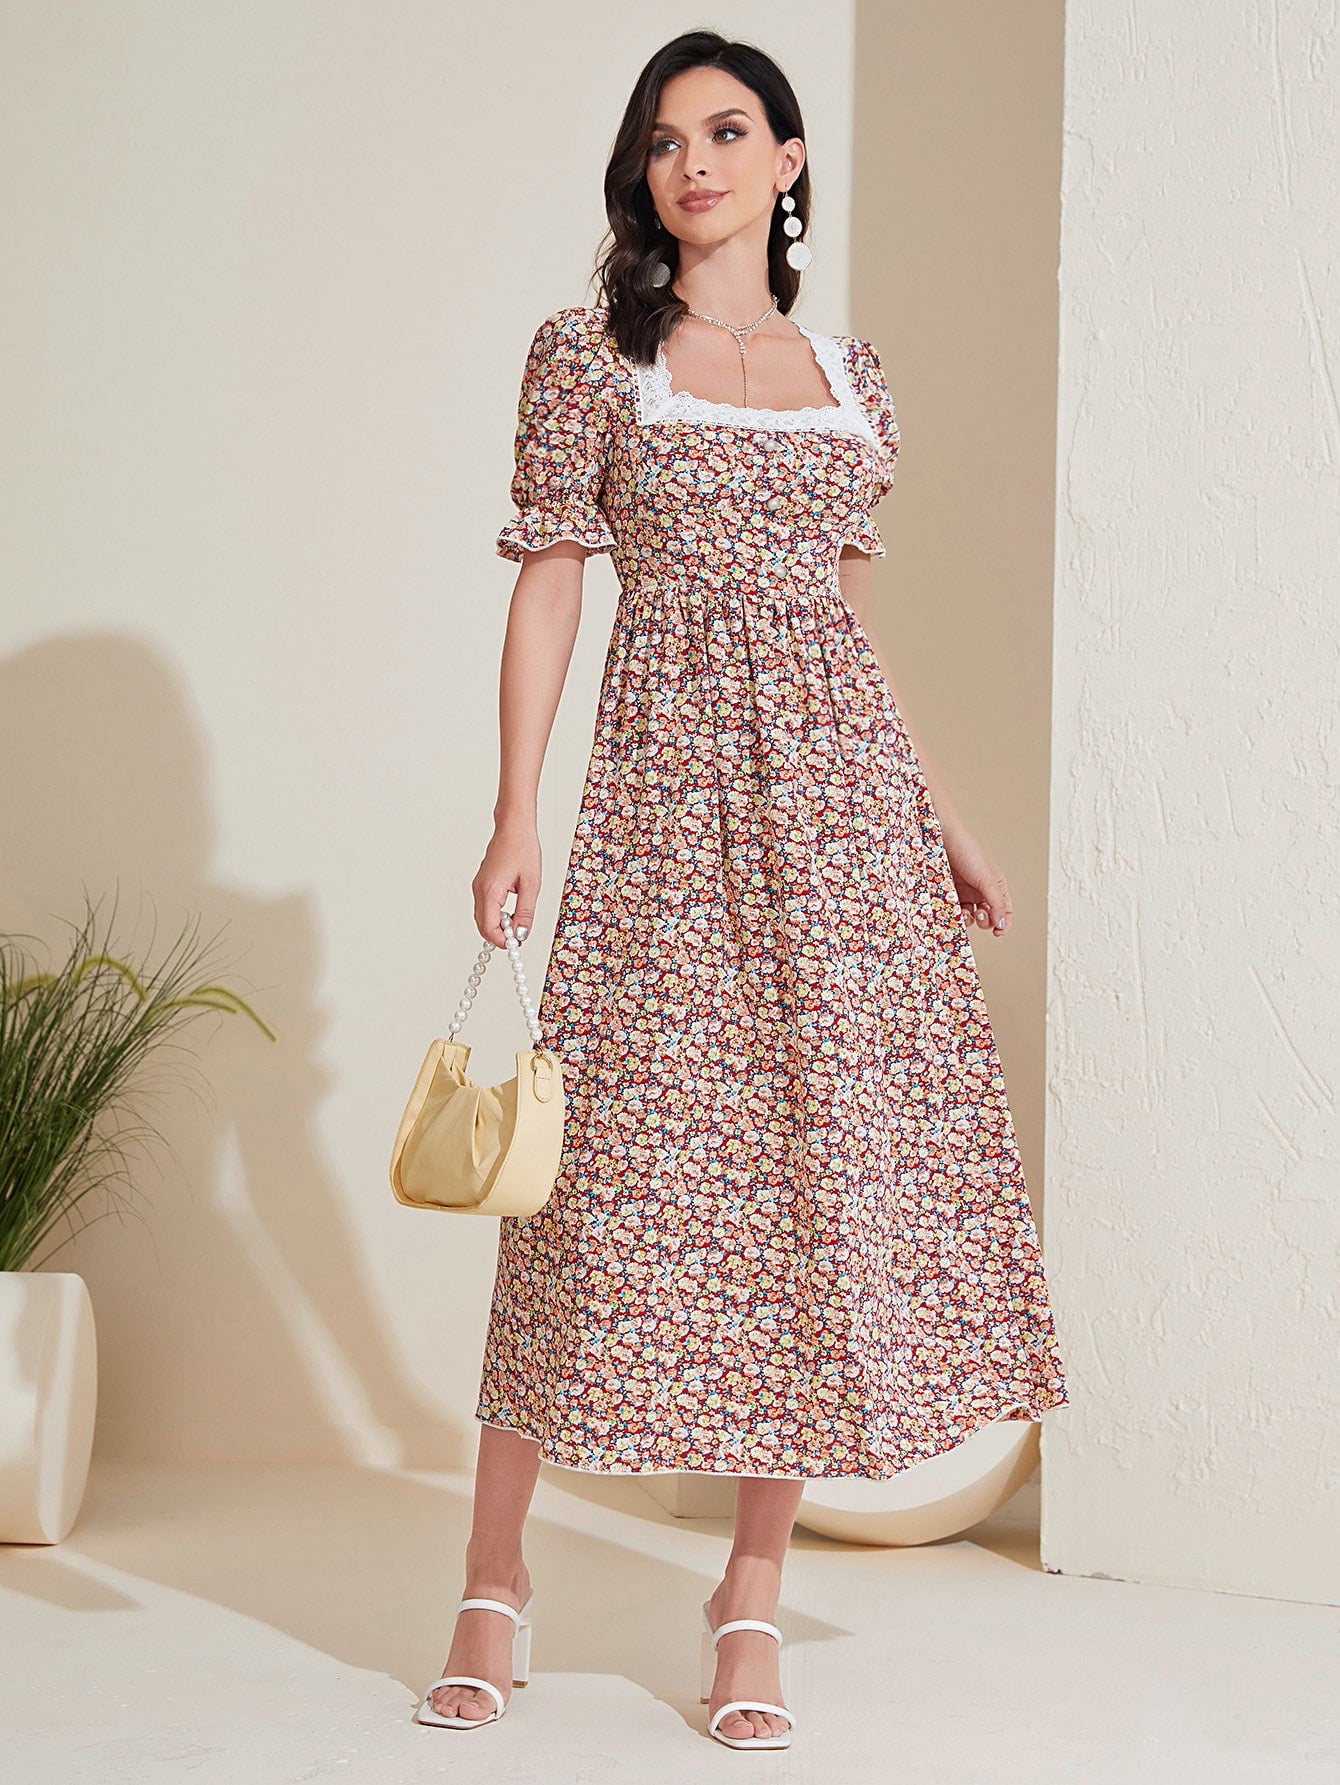 Floral Print Dress with Lace Trim | Pomona and Peach